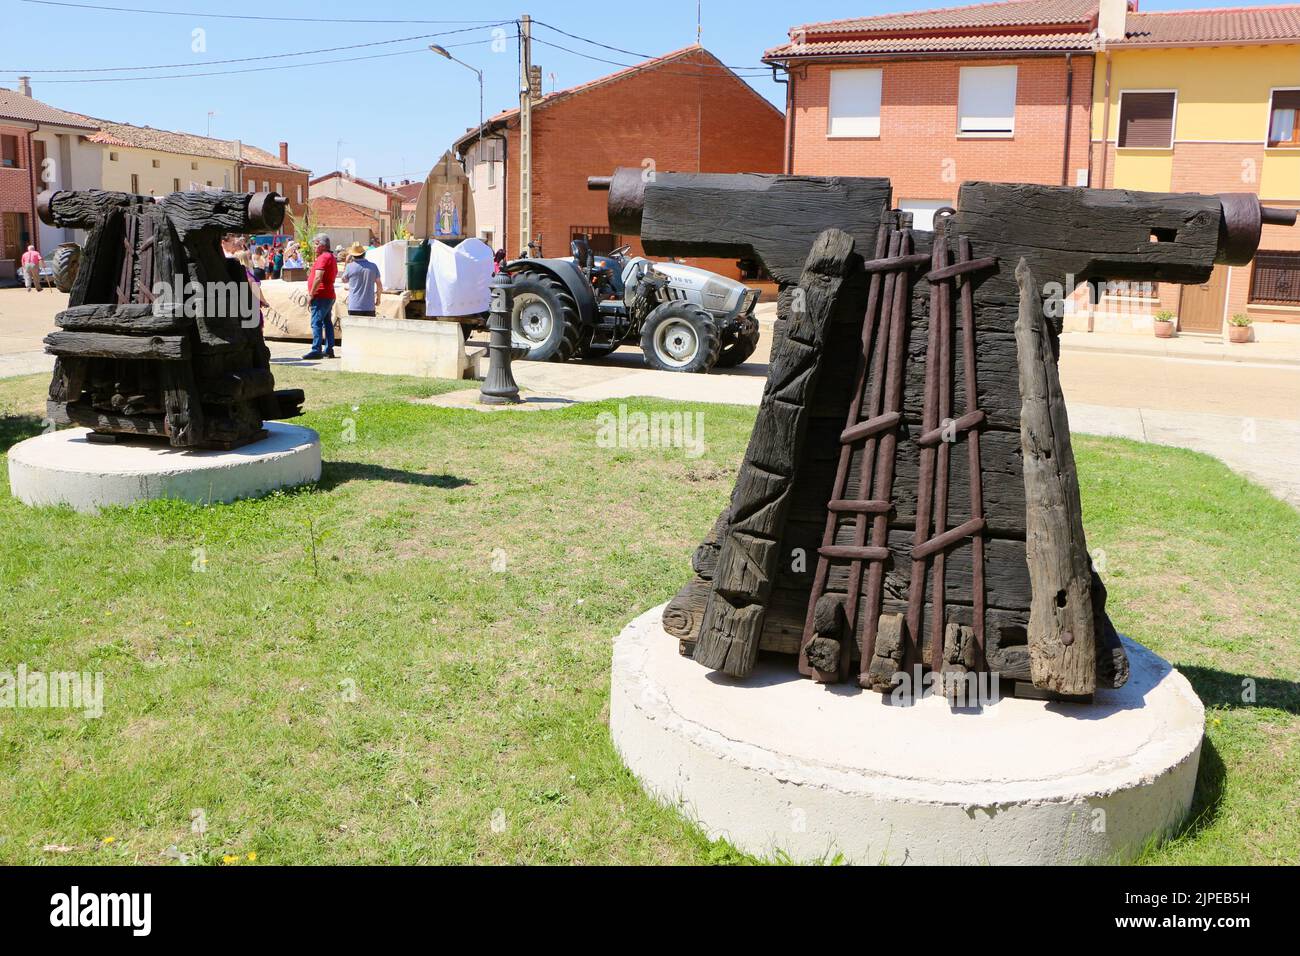 Two disused headstocks from the church in Lantadilla Palencia Spain nw on display with a Lamborghini tractor behind during the August fiestas Stock Photo